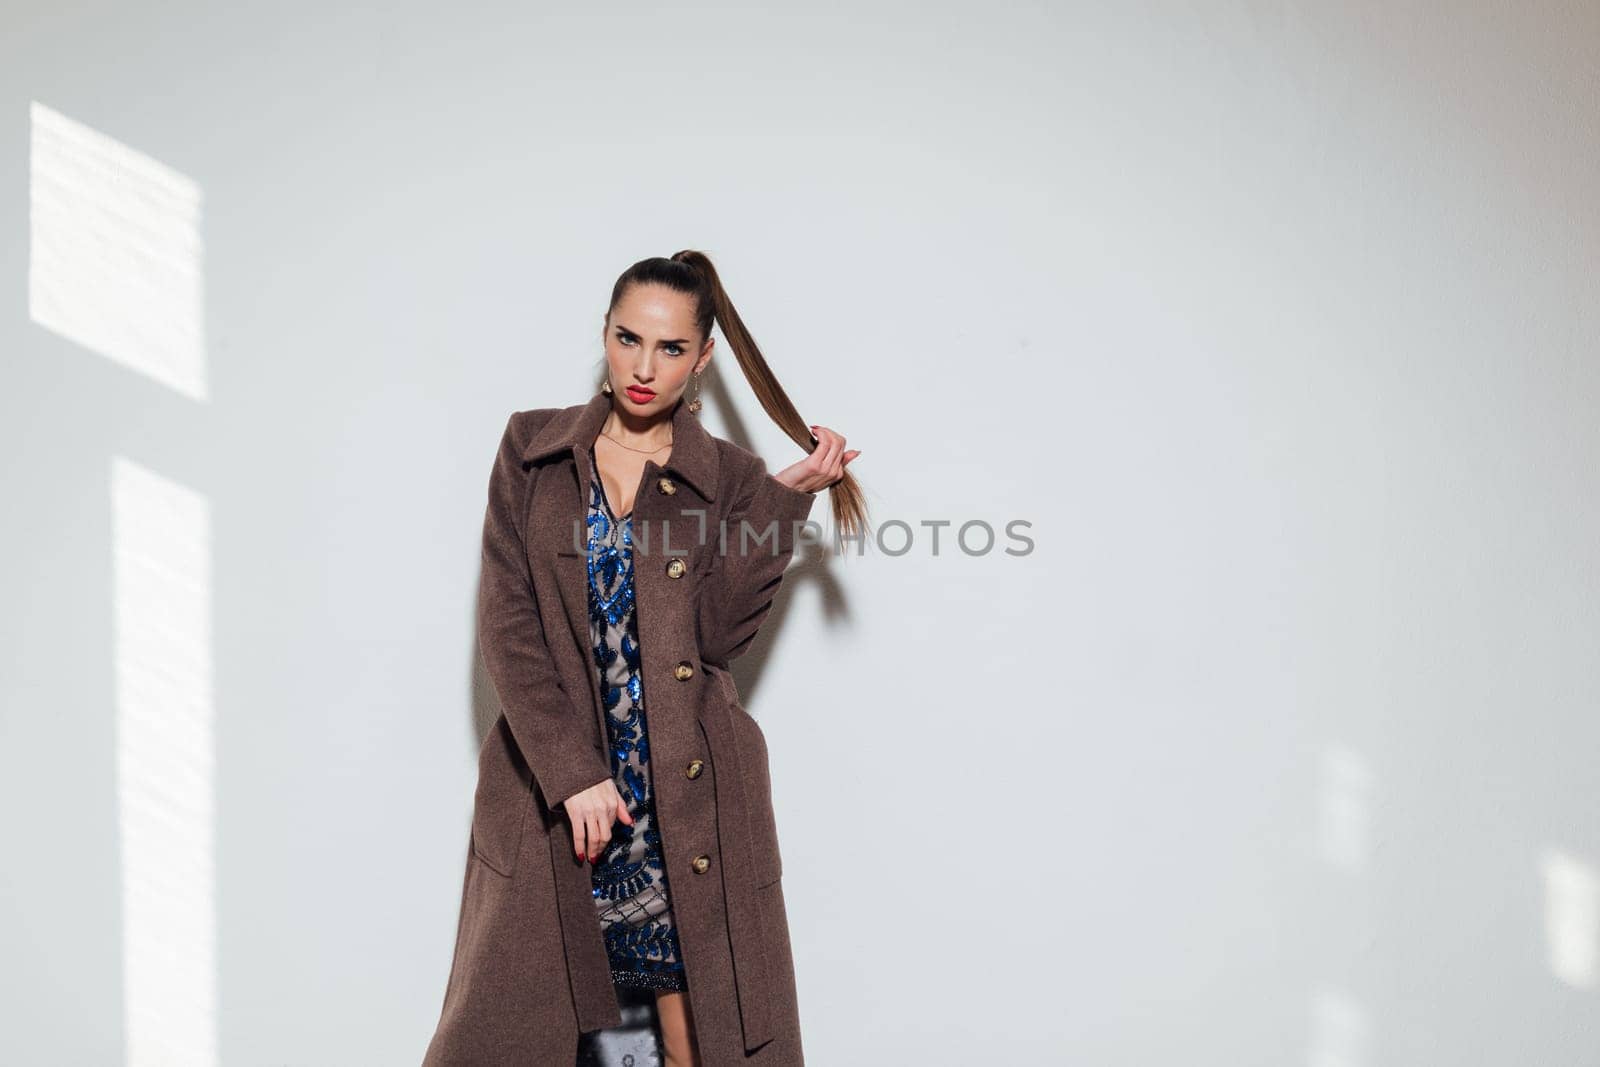 fashionable woman in a raincoat on a white background